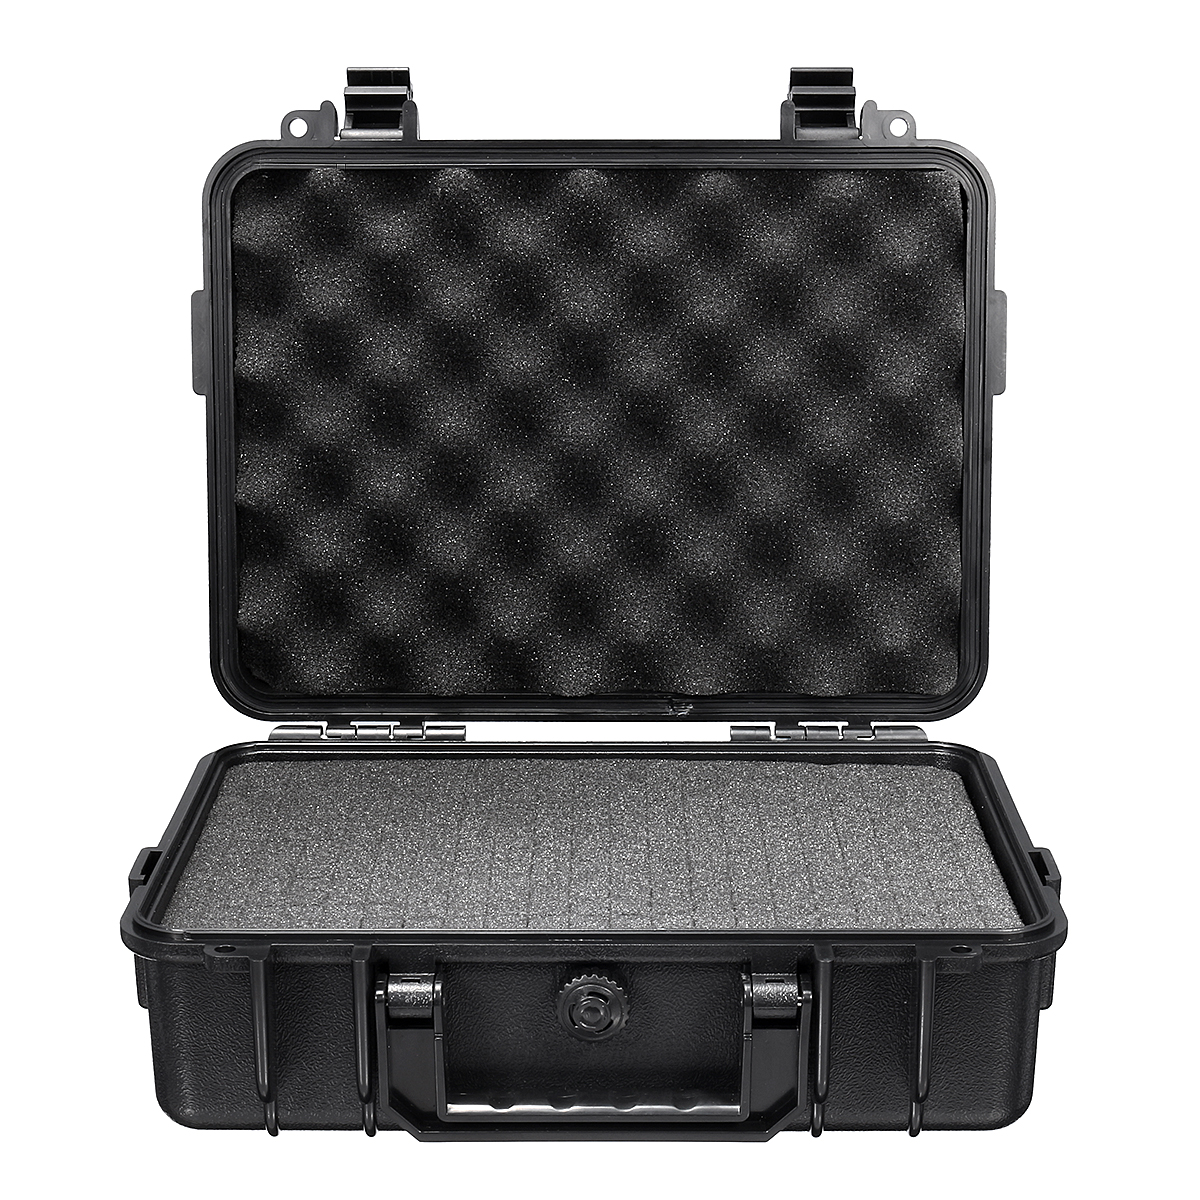 Waterproof-Hard-Carry-Tool-Case-Bag-Storage-Box-Camera-Photography-with-Sponge-18012050mm-1661734-1